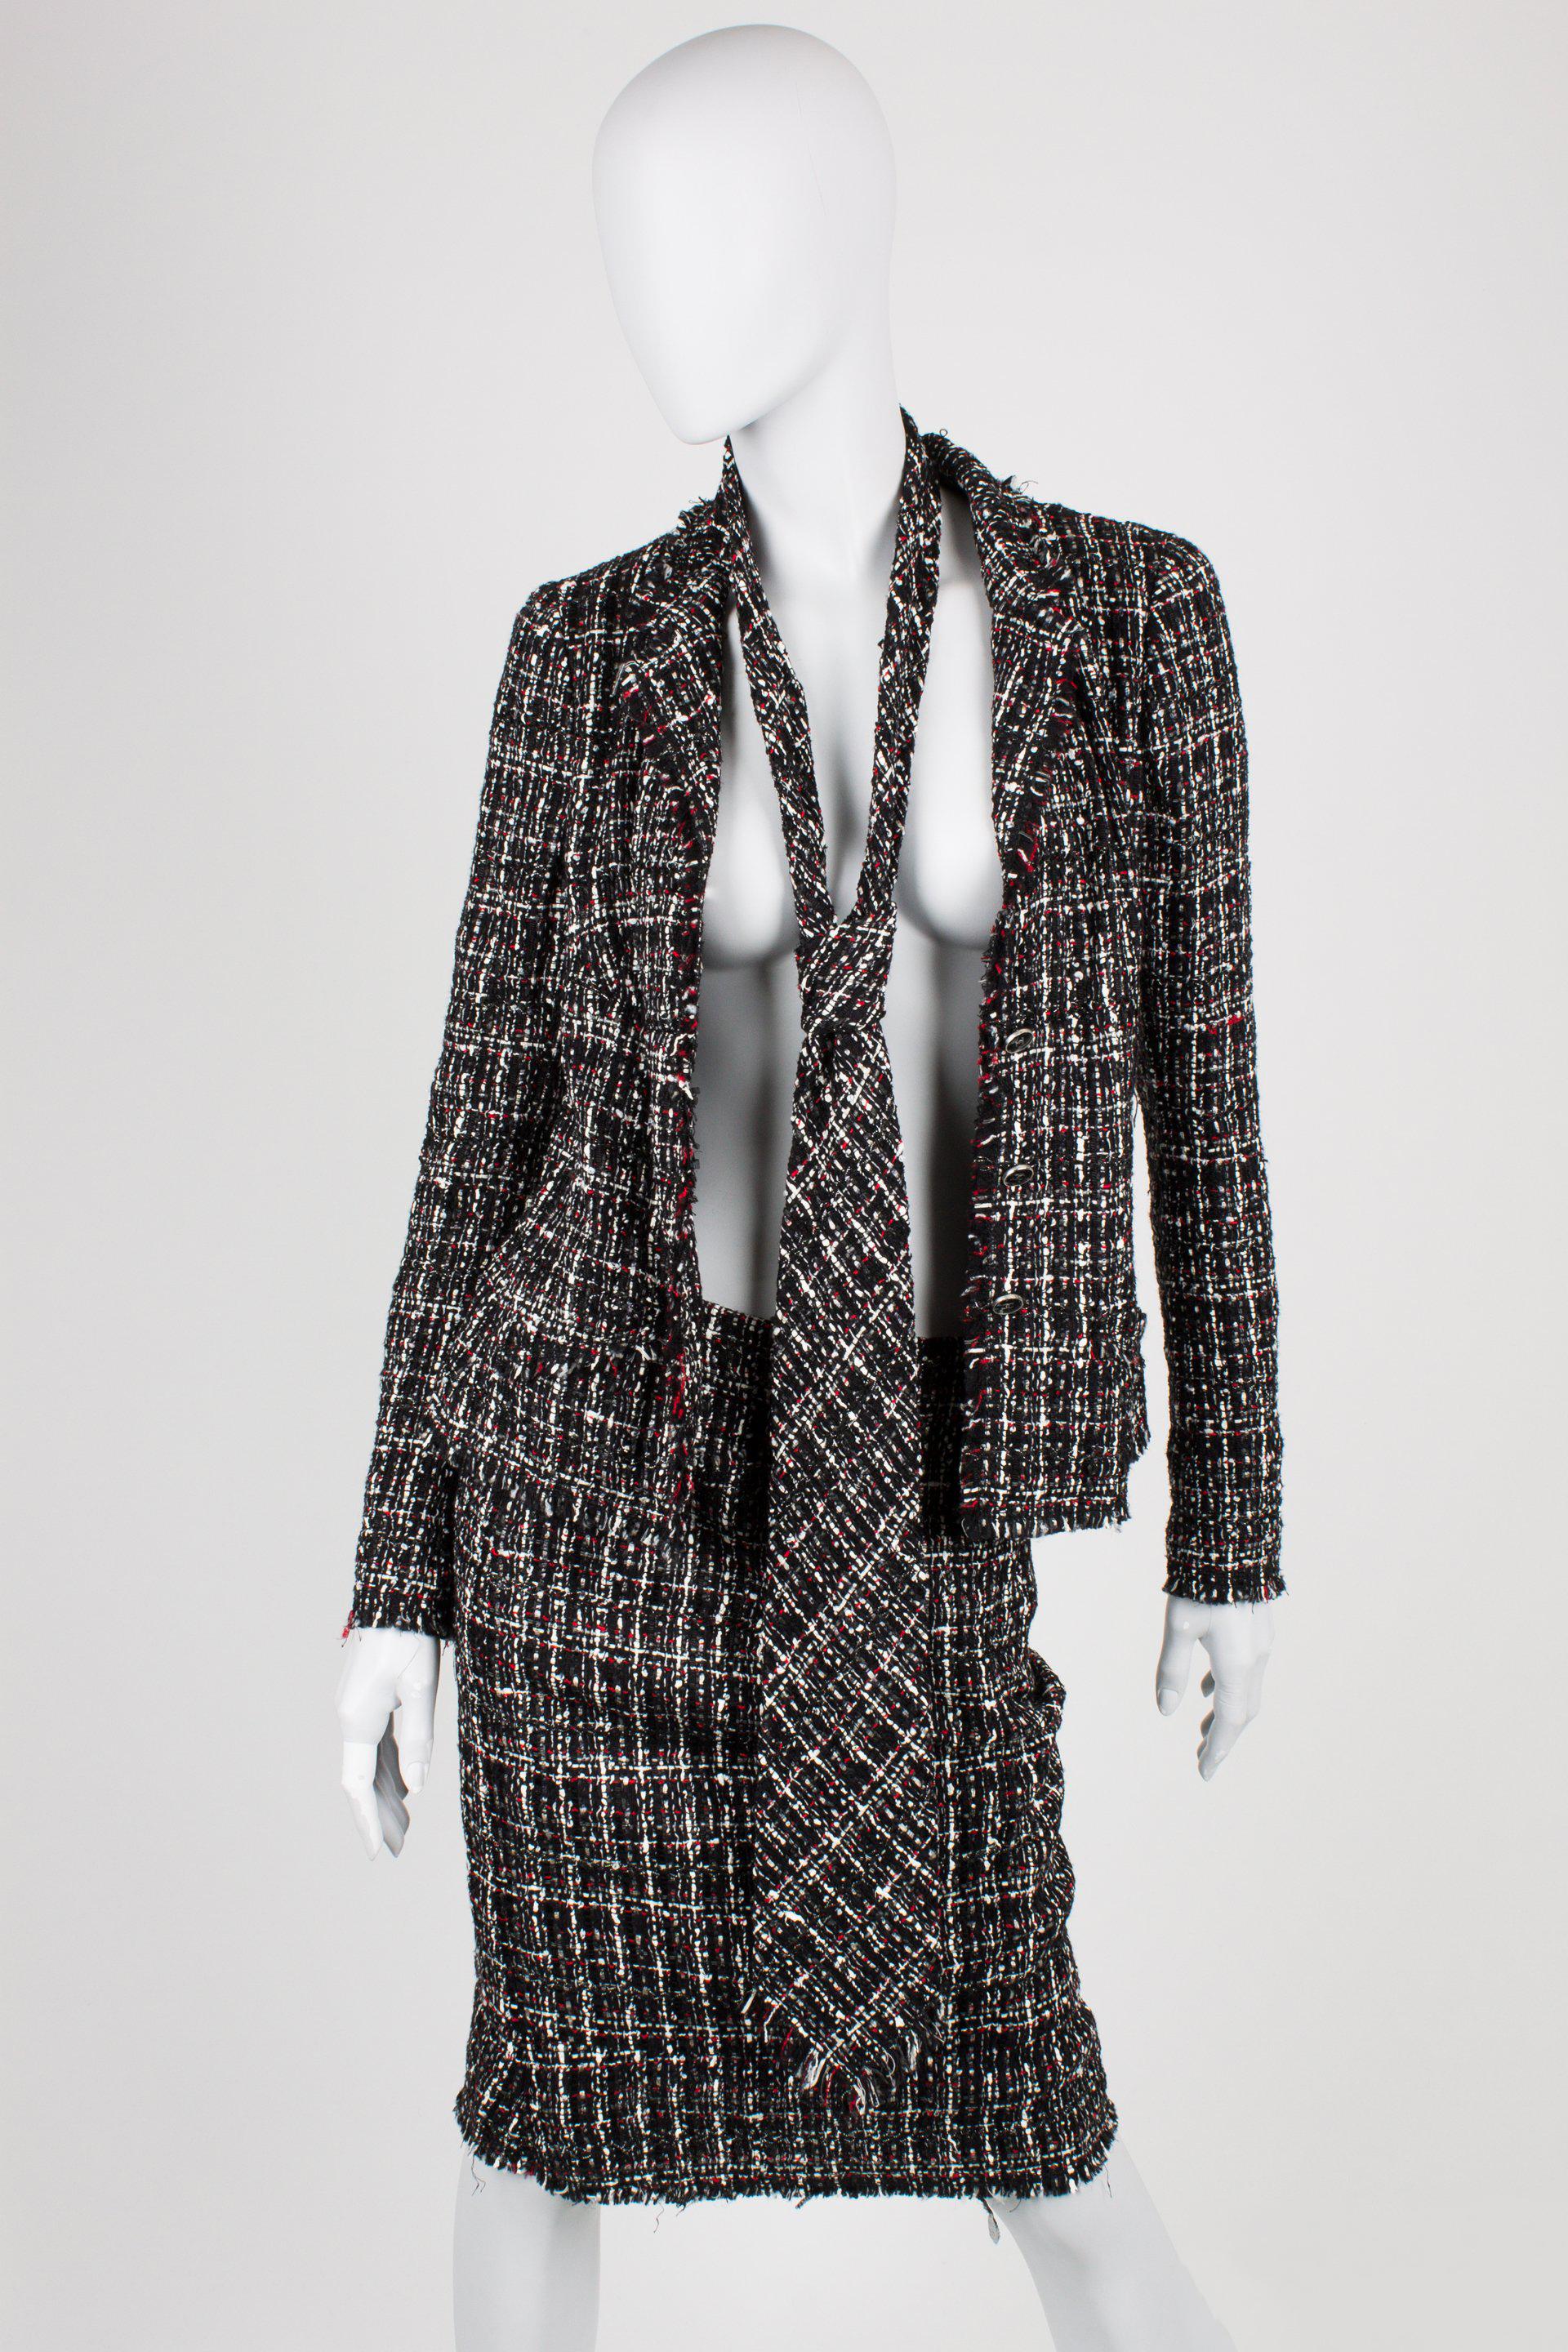 Chanel Suit 3-pcs Jacket, Skirt & Tie - black/white/grey/red For Sale 1